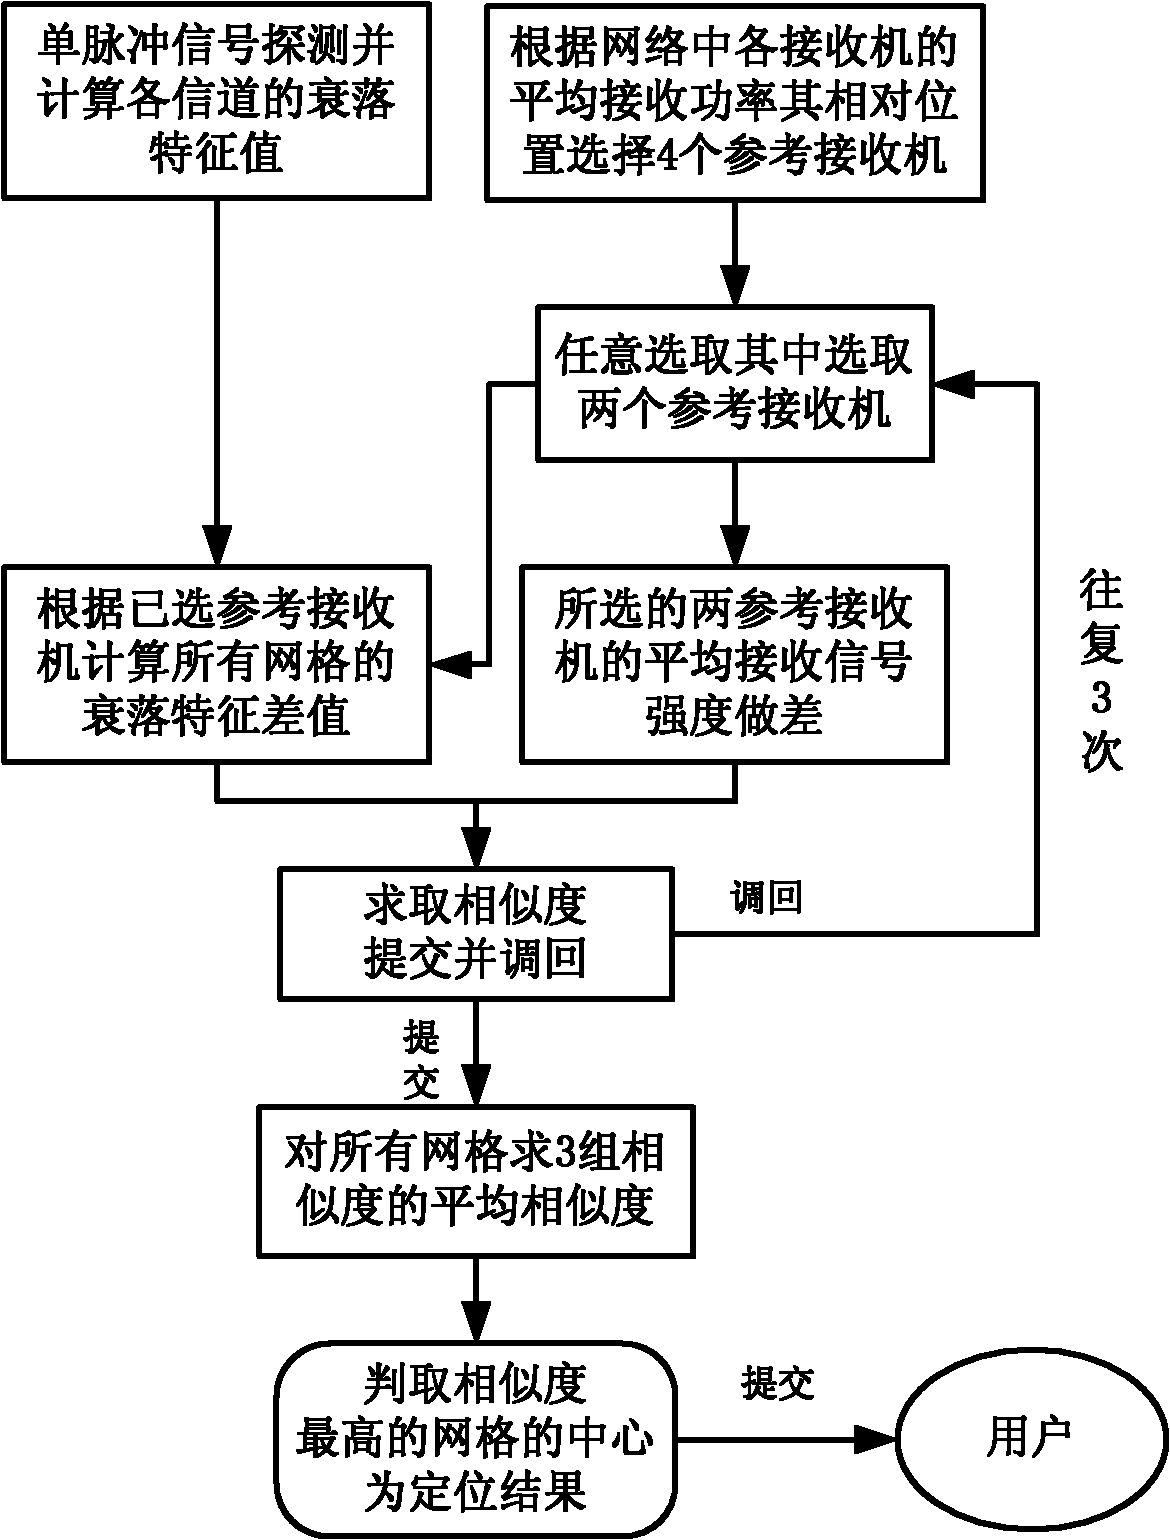 Passive positioning method for combining RSSI and pattern matching